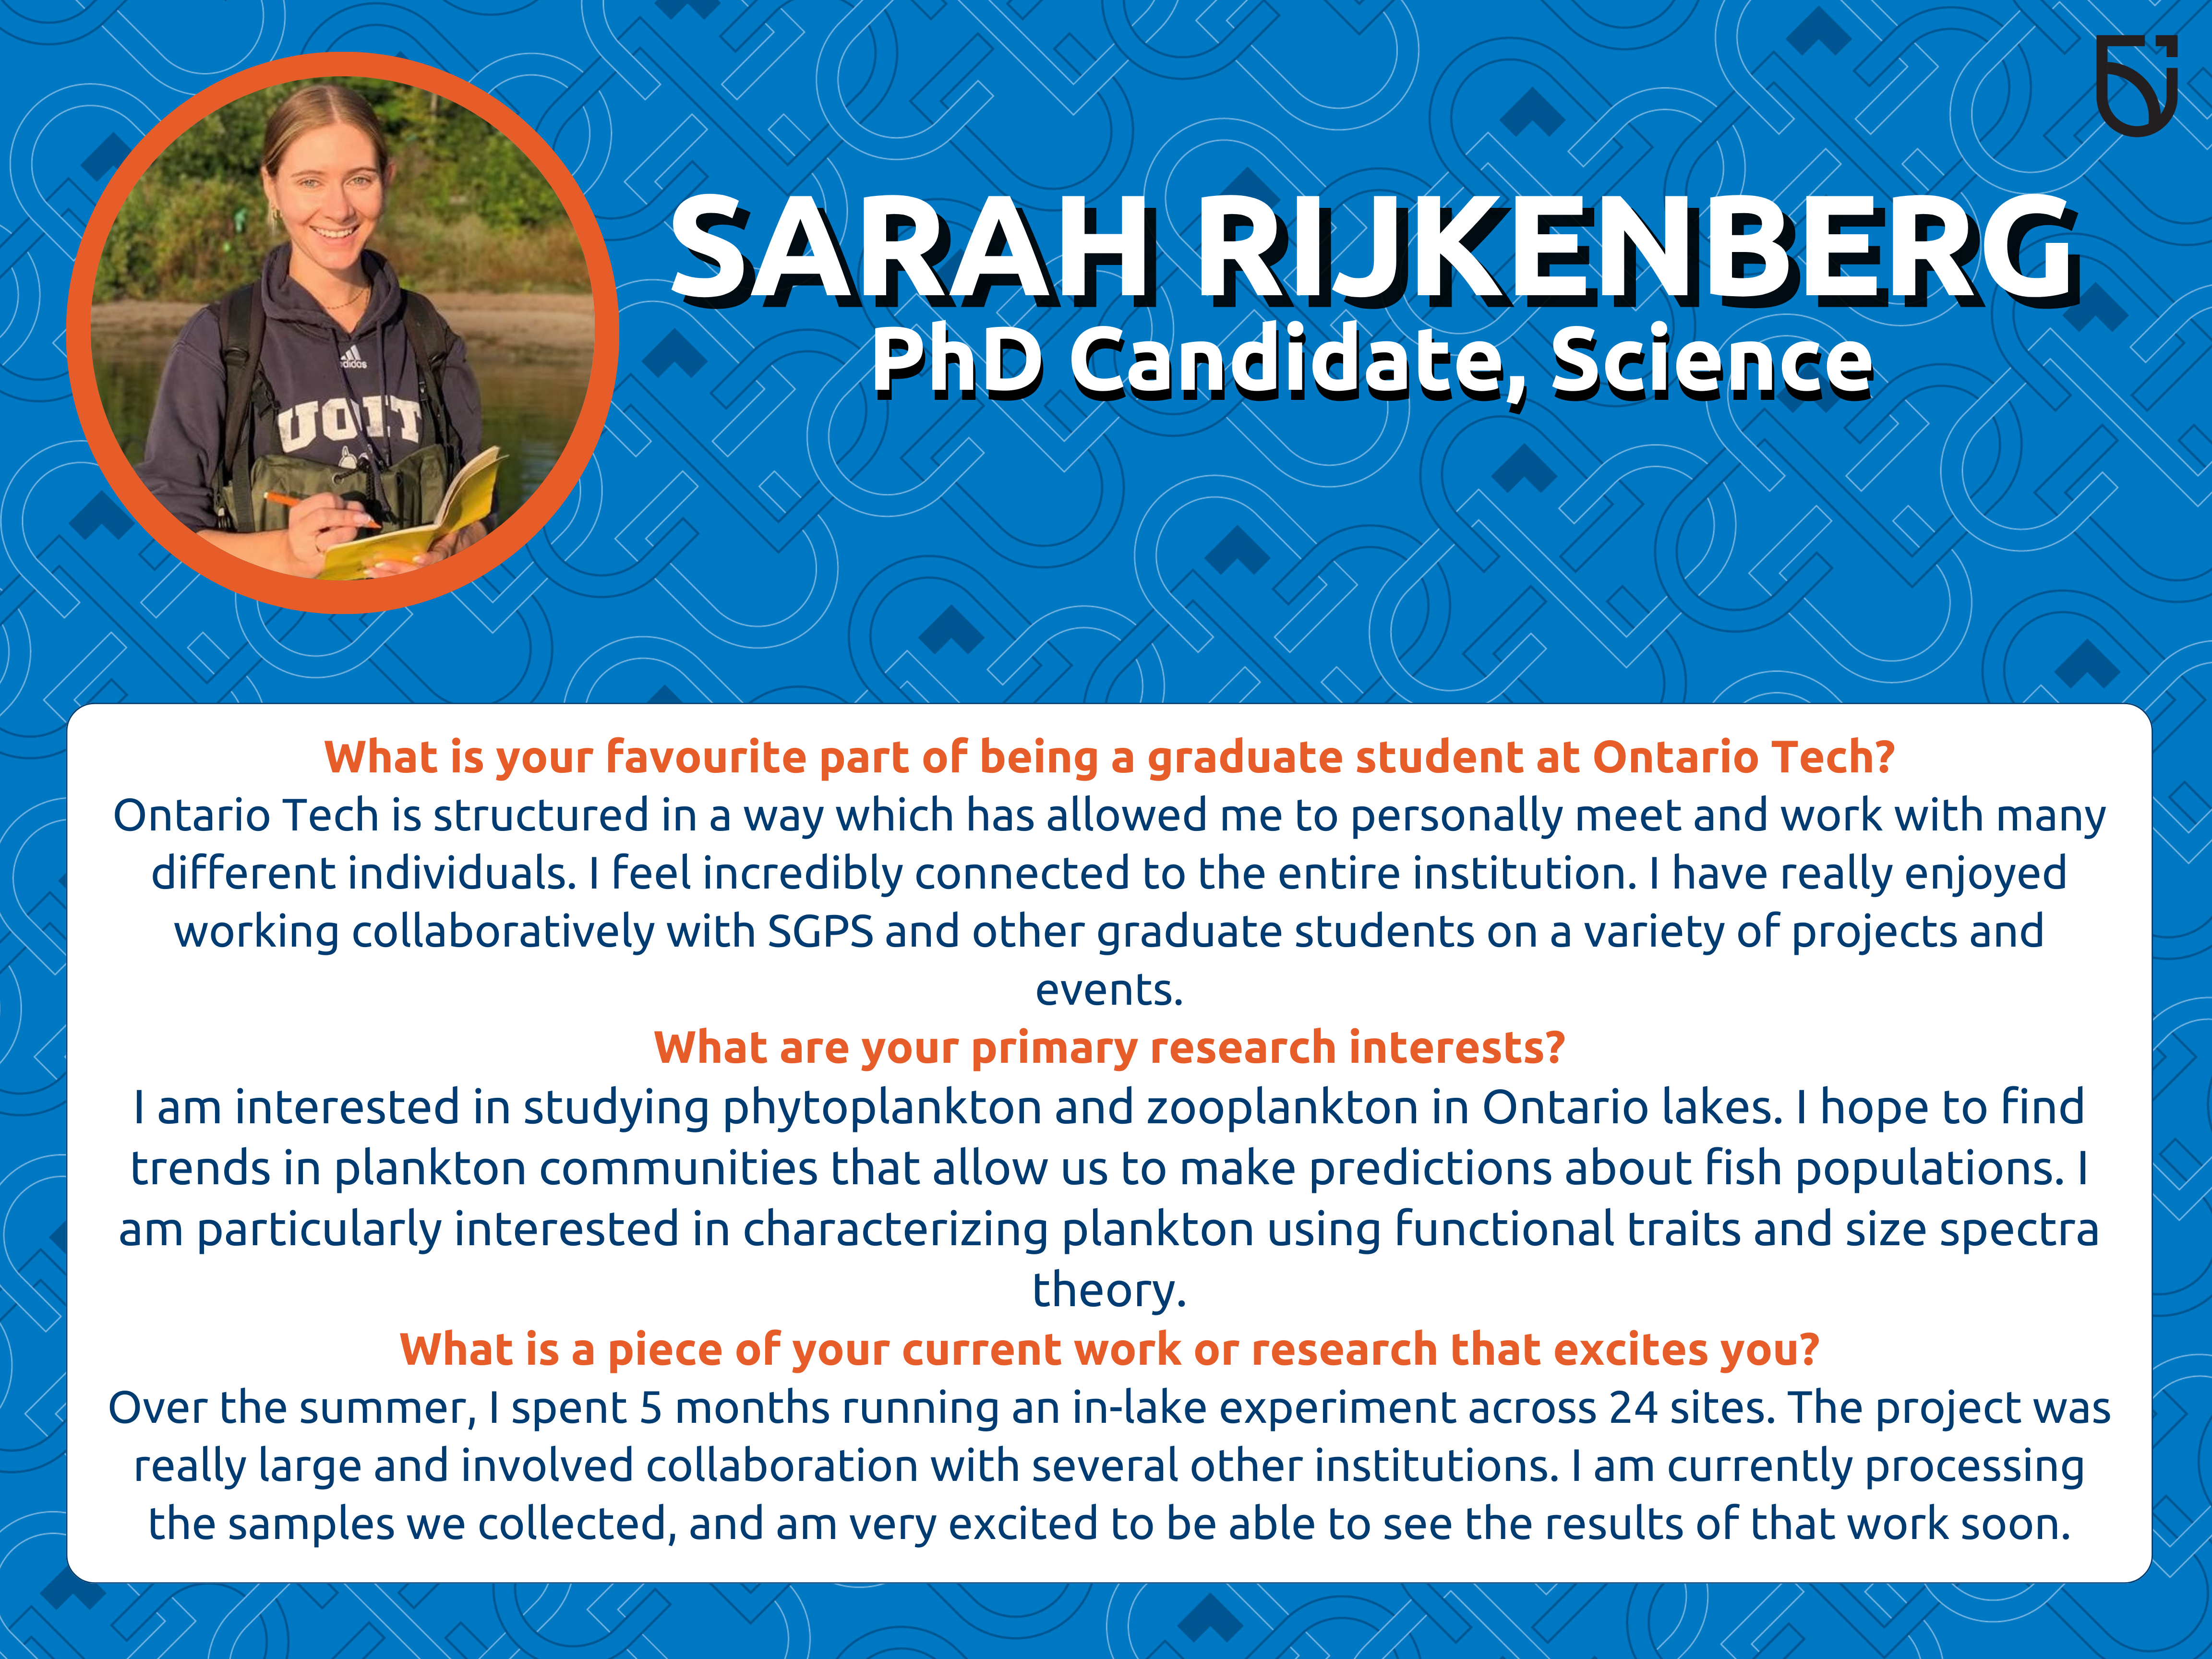 This photo is a Women’s Wednesday feature of Sarah Rijkenberg, a PhD Candidate in the Faculty of Science